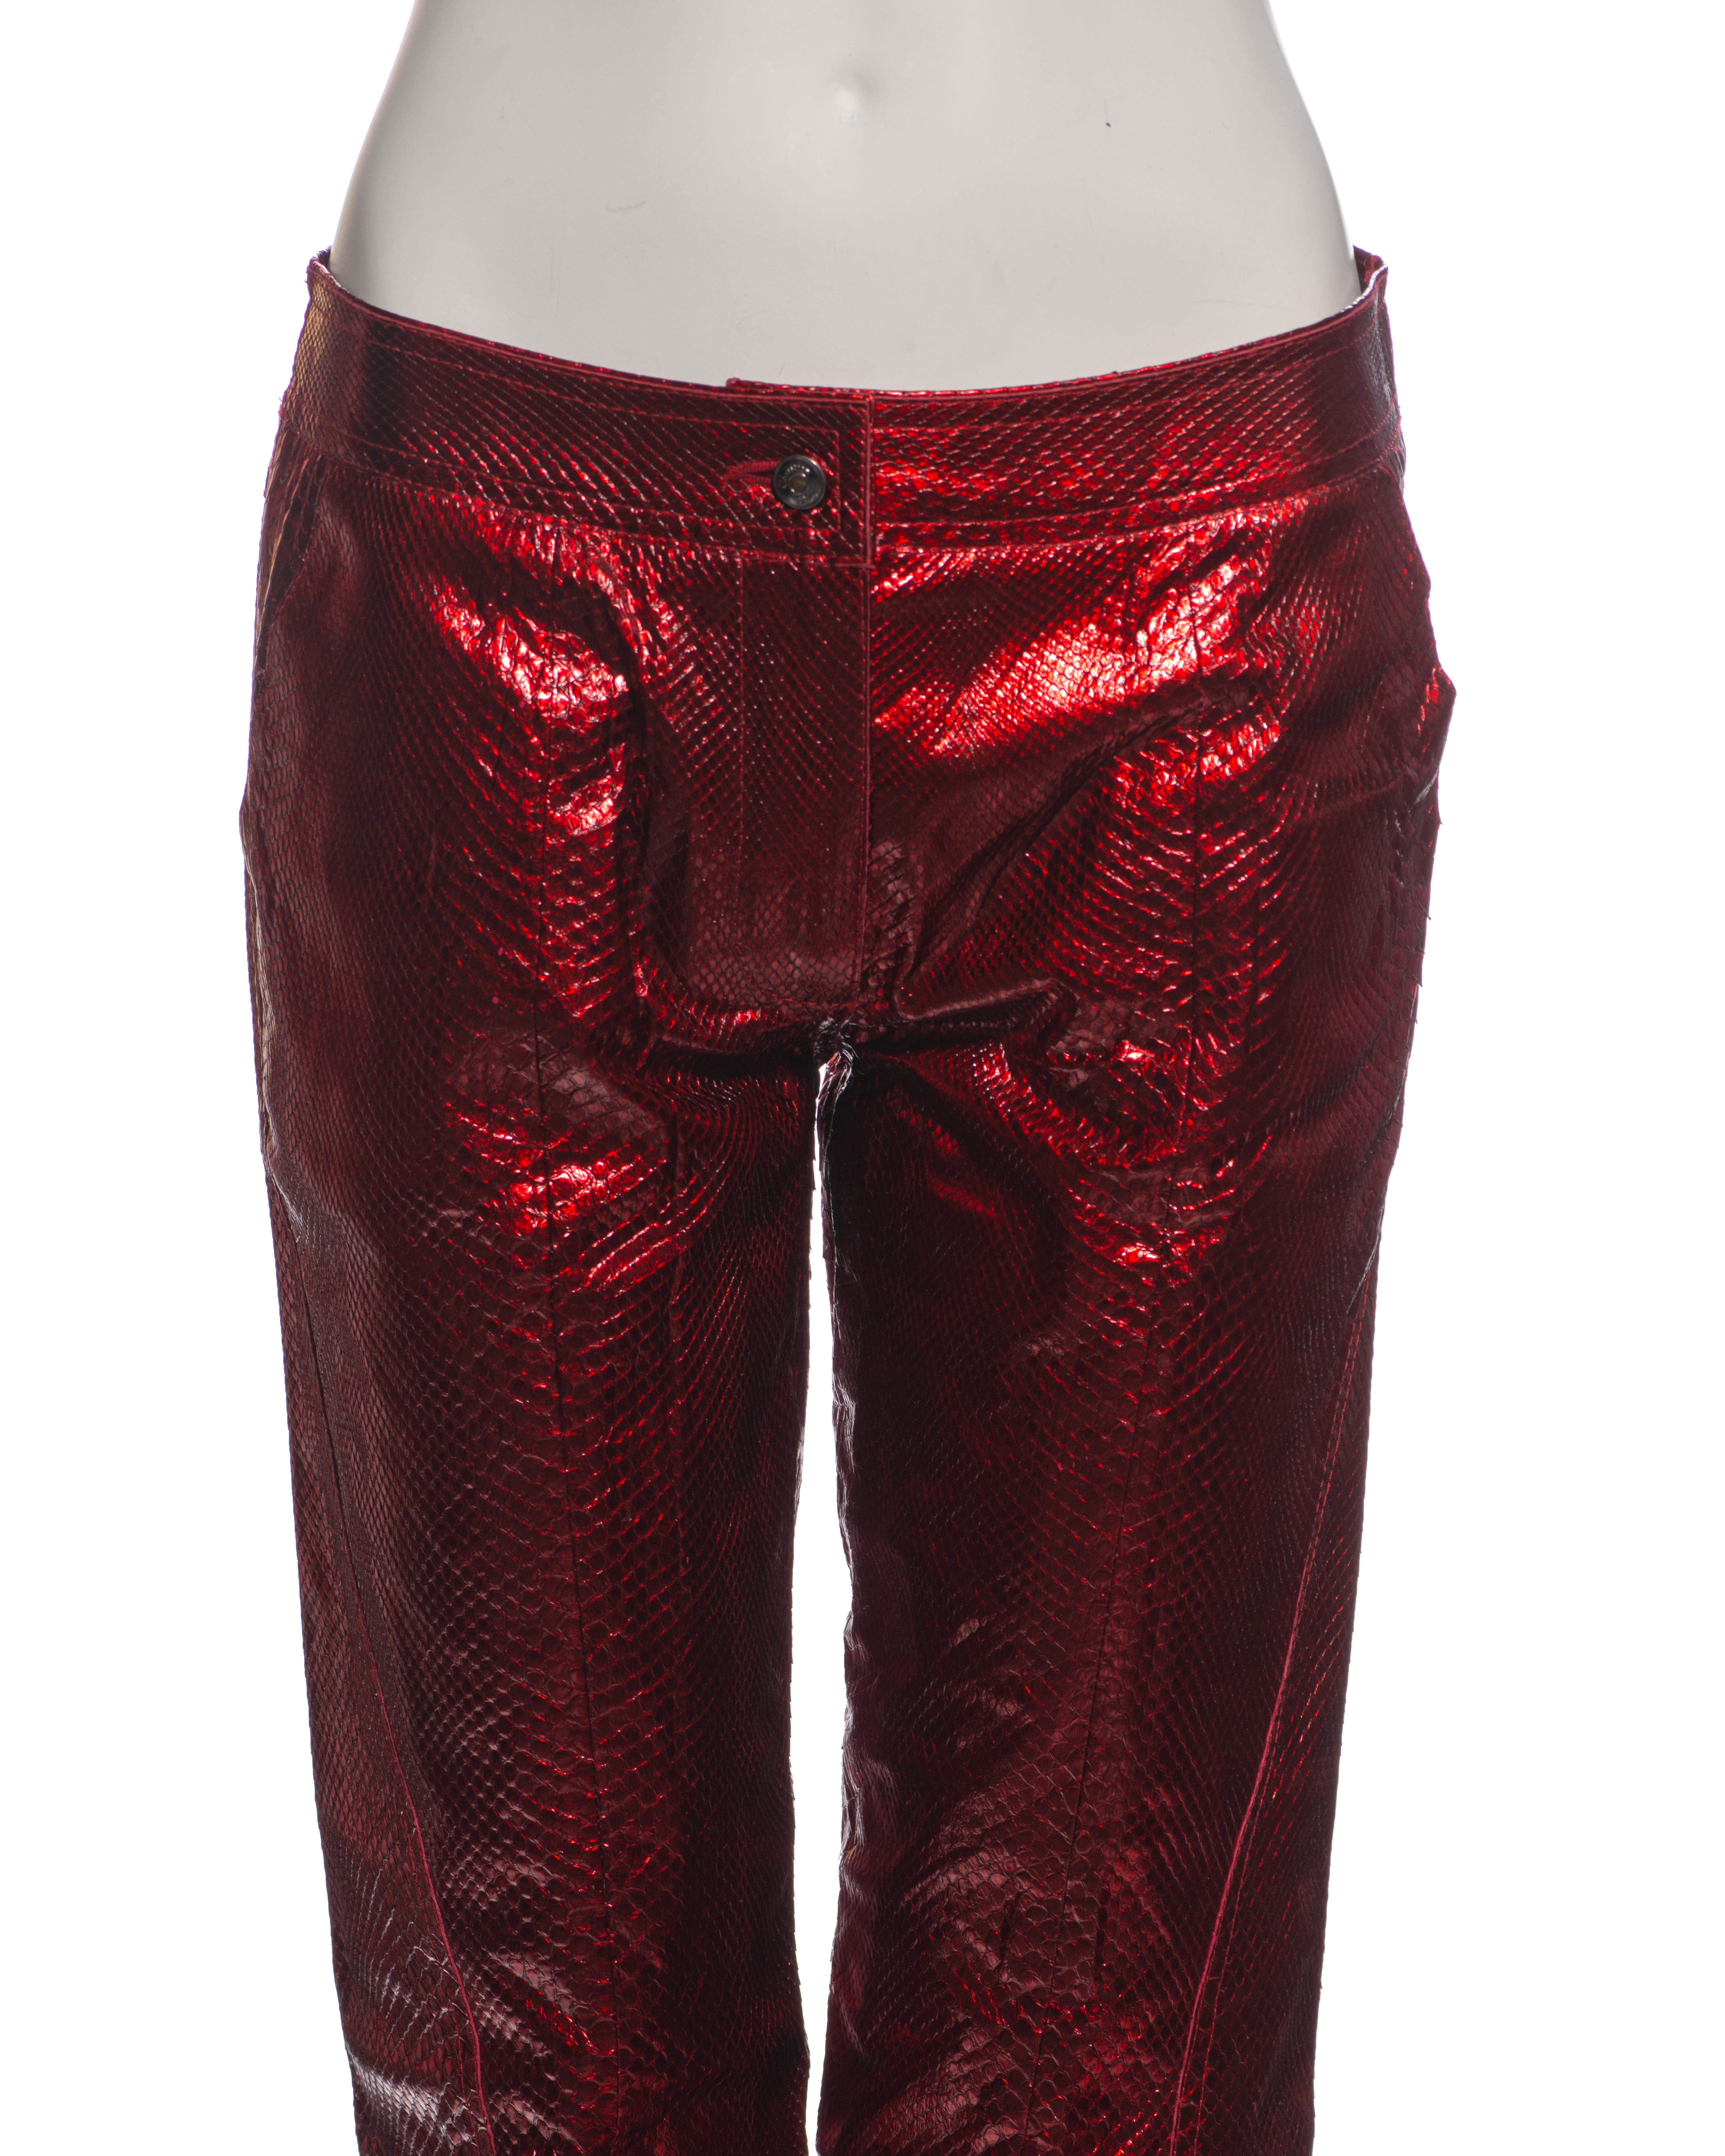 Christian Dior by John Galliano Metallic Red Python Flared Trousers, ss 2002 In Excellent Condition For Sale In London, GB